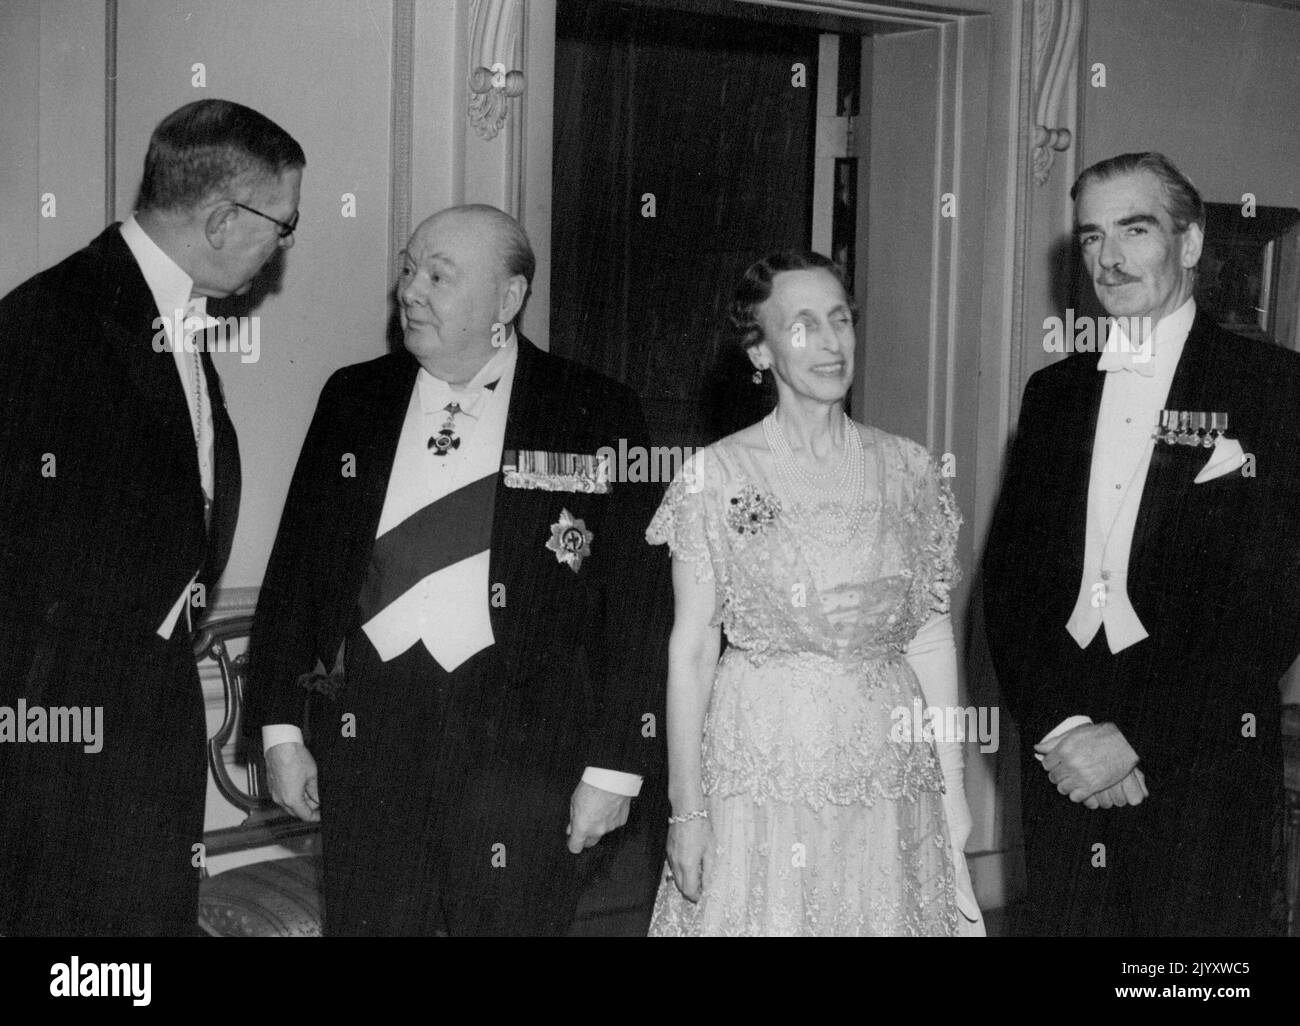 The King and Queen of Sweden Were The Guests of The Swedish Ambassador and Mrs. Hagglof at Dinner at The Embassy in London, This Evening. Among The Guests invited Were Sir Winston and Lady Churchill. Ops from L to R: The King of Sweden, Sir Winston Chure Hill, The Queen of Sweden and Mr. Anthony Eden. November 10, 1953. (Photo by Daly Mail Contract) Stock Photo